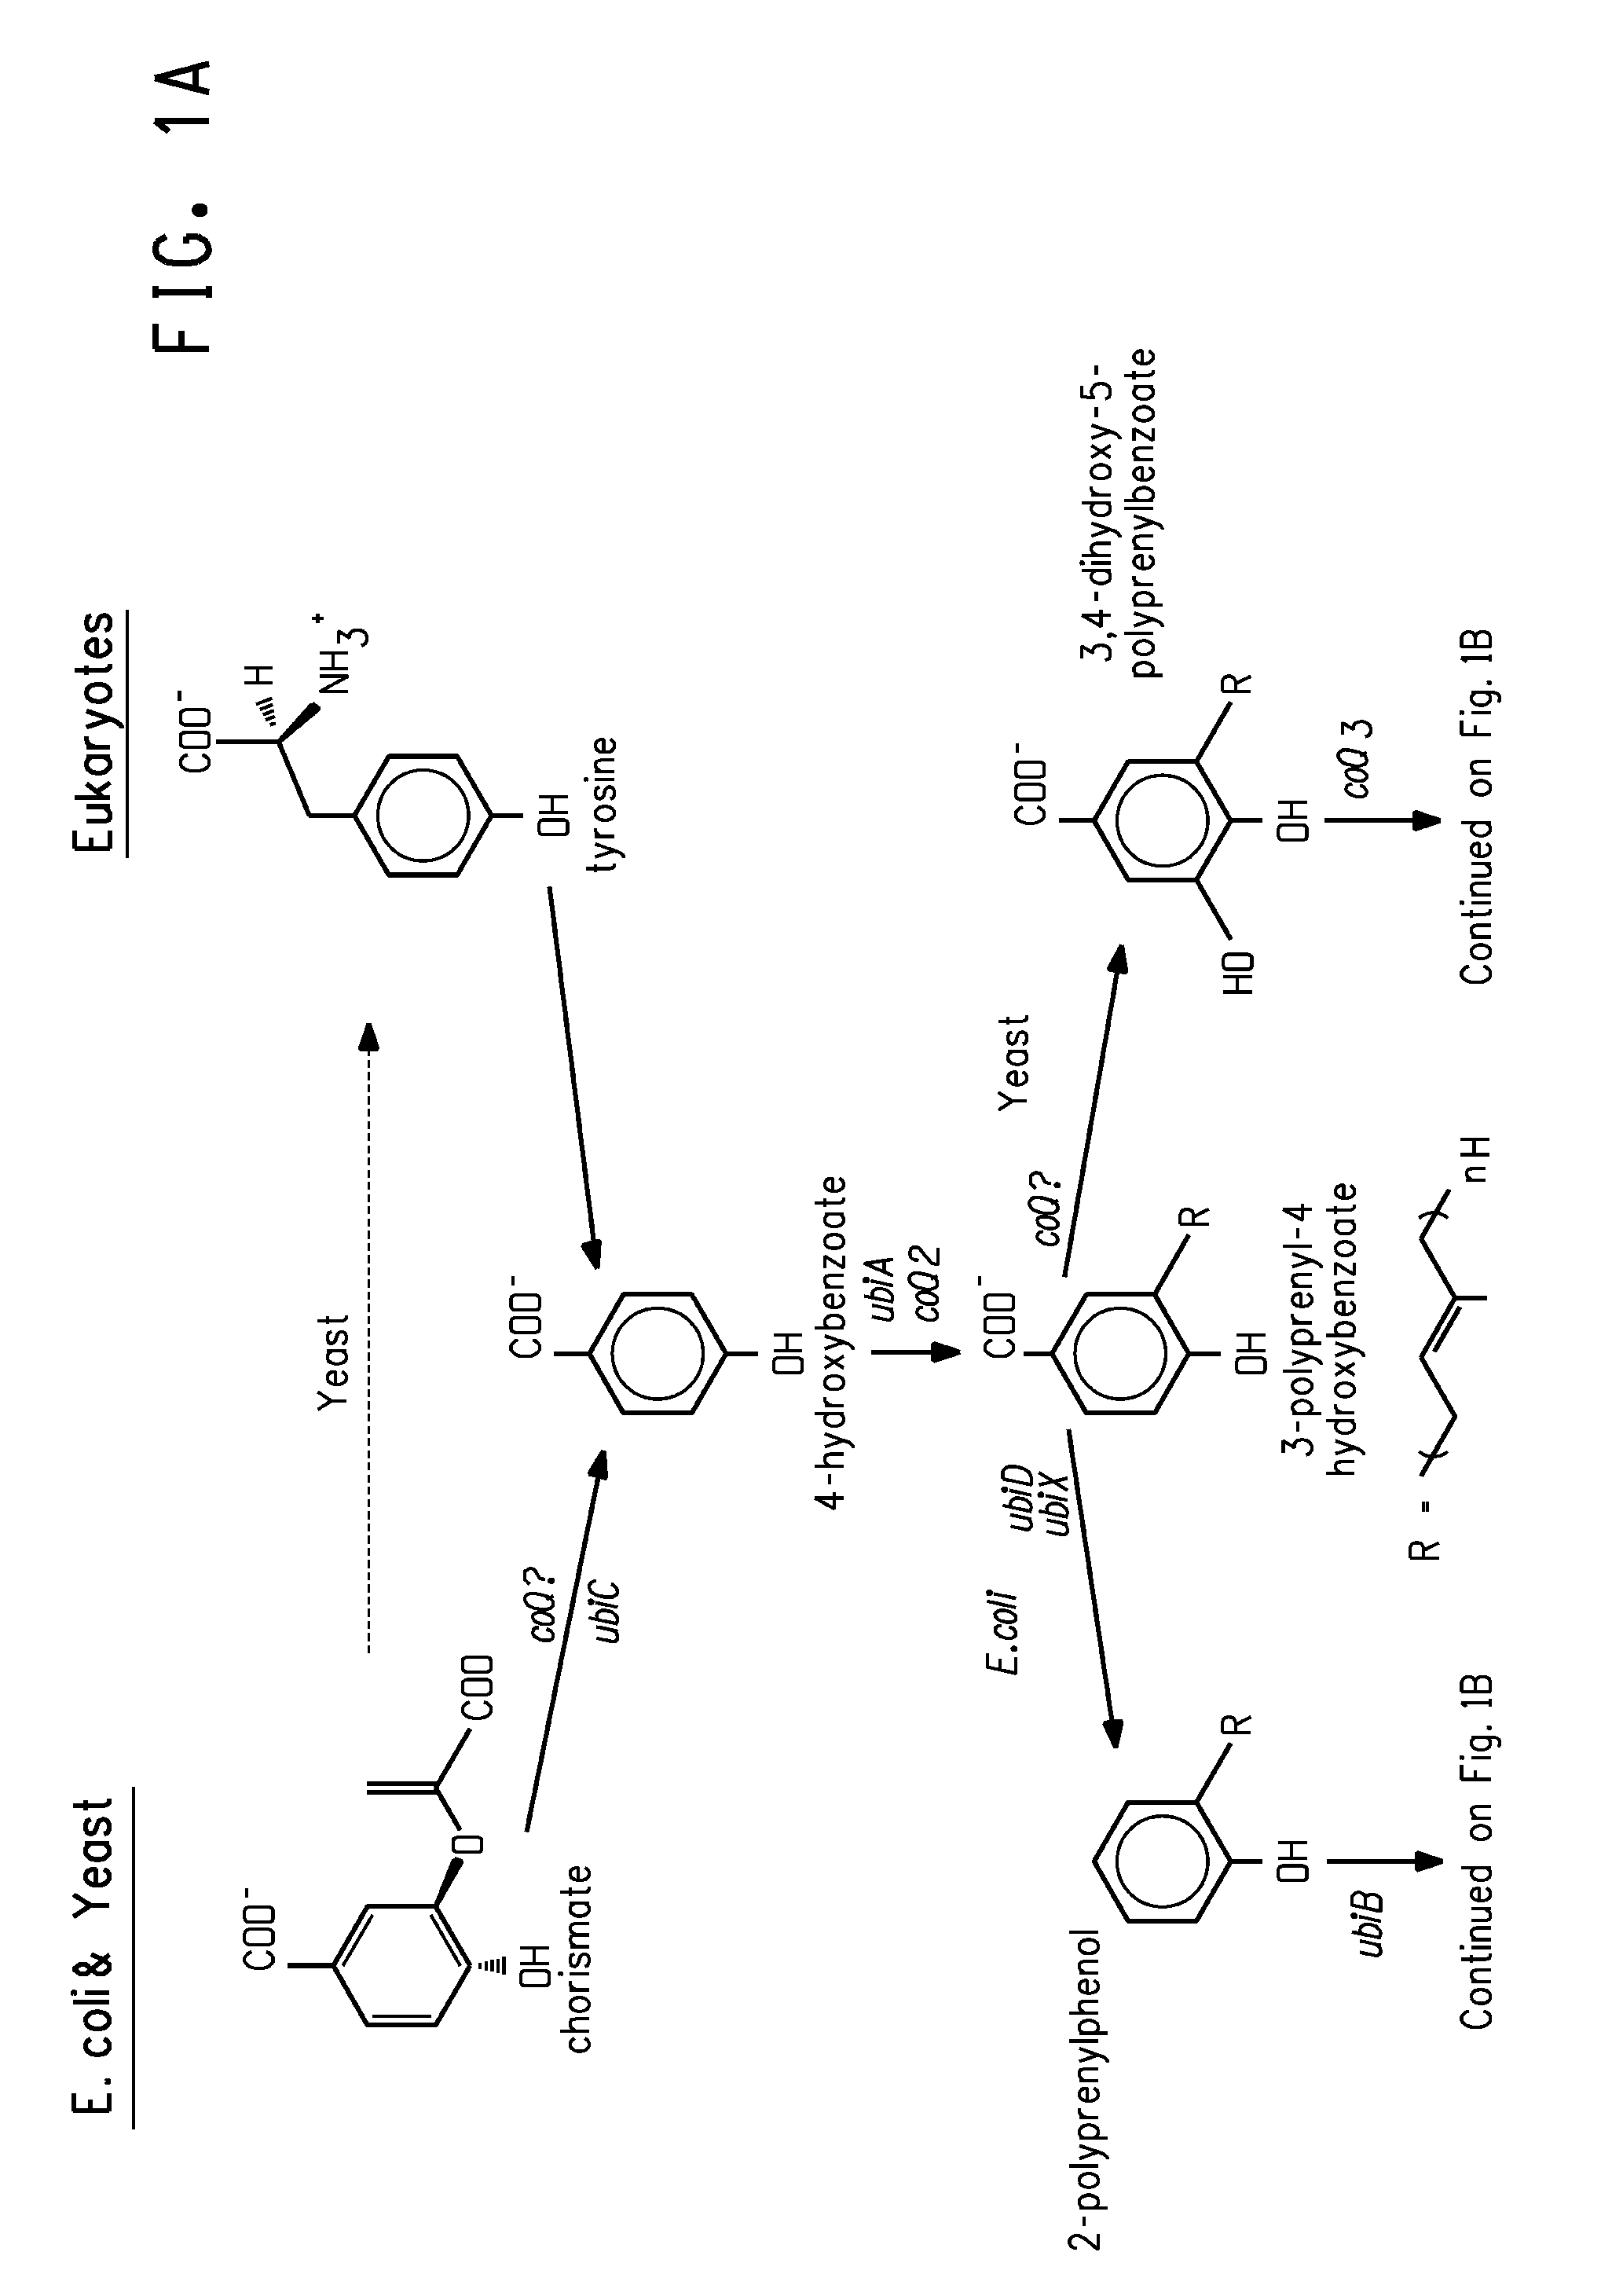 Coenzyme Q10 Production in a Recombinant Oleaginous Yeast